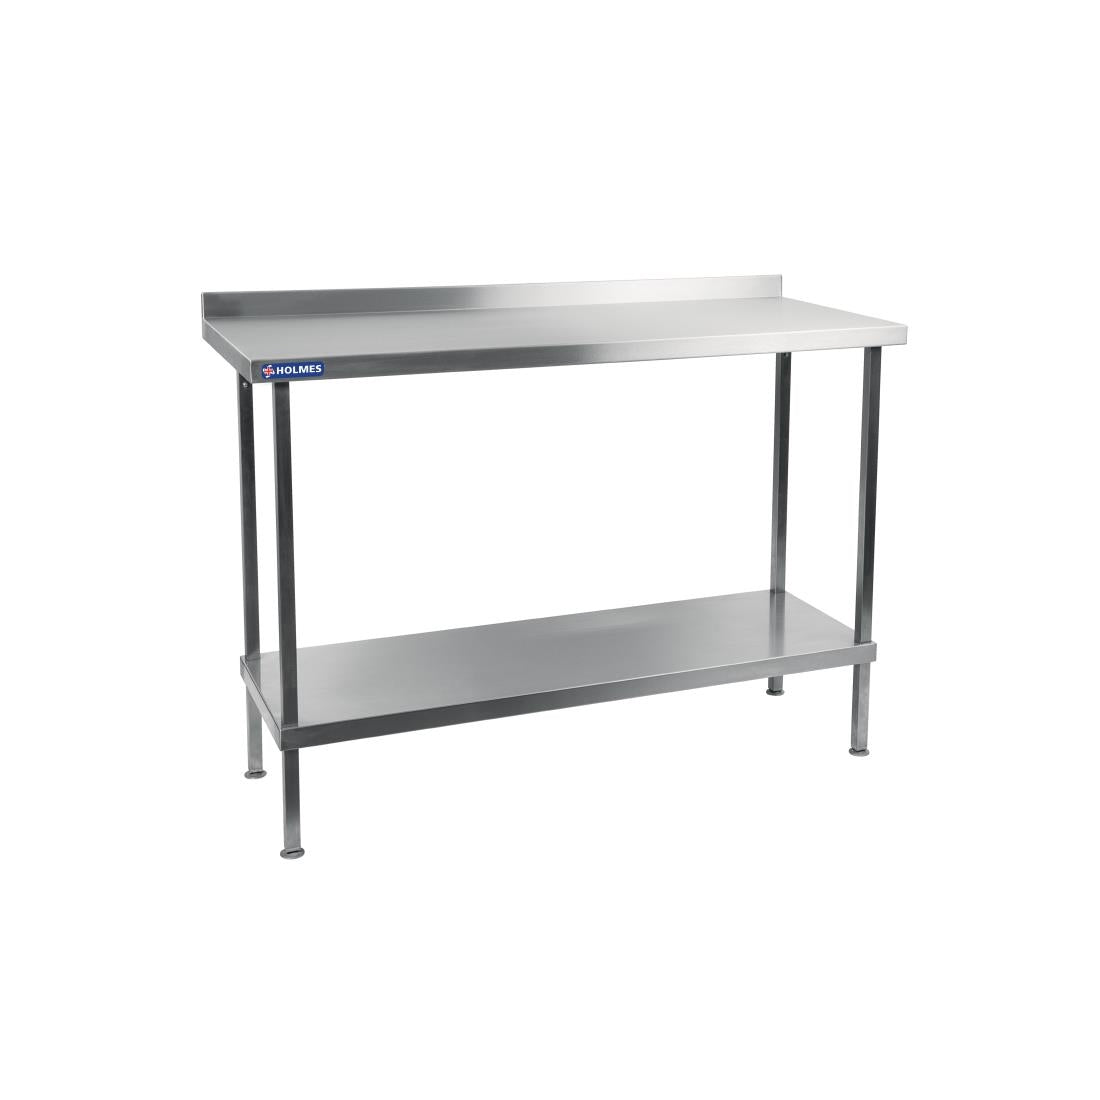 DR034 Holmes Stainless Steel Wall Table with Upstand 600mm JD Catering Equipment Solutions Ltd